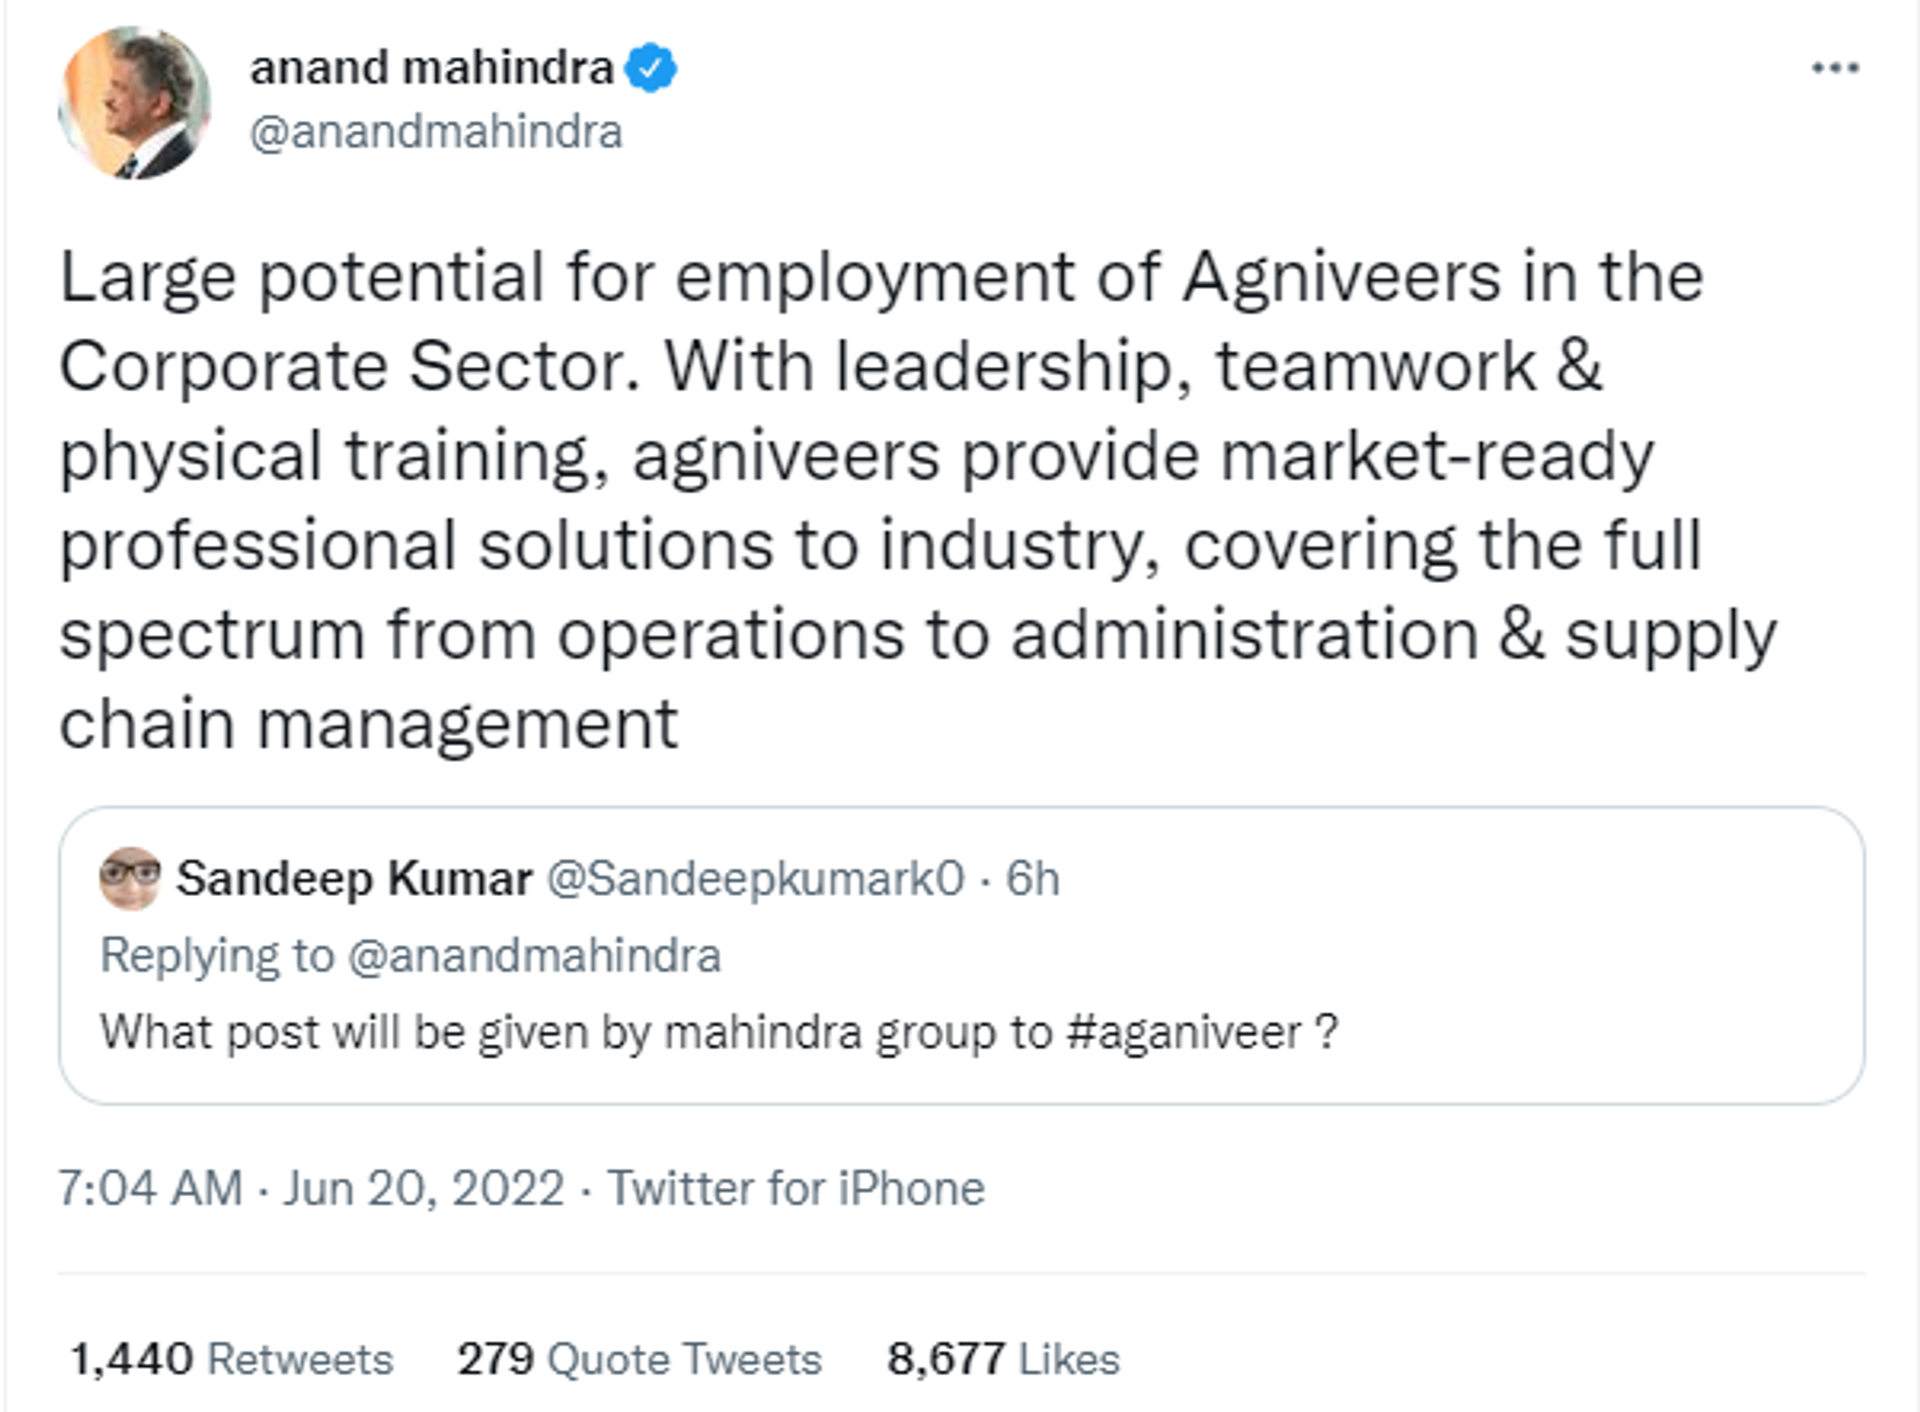 Anand Mahindra Says Agniveers Can Cover Full Specturm of Corporate Sector - Sputnik International, 1920, 20.06.2022